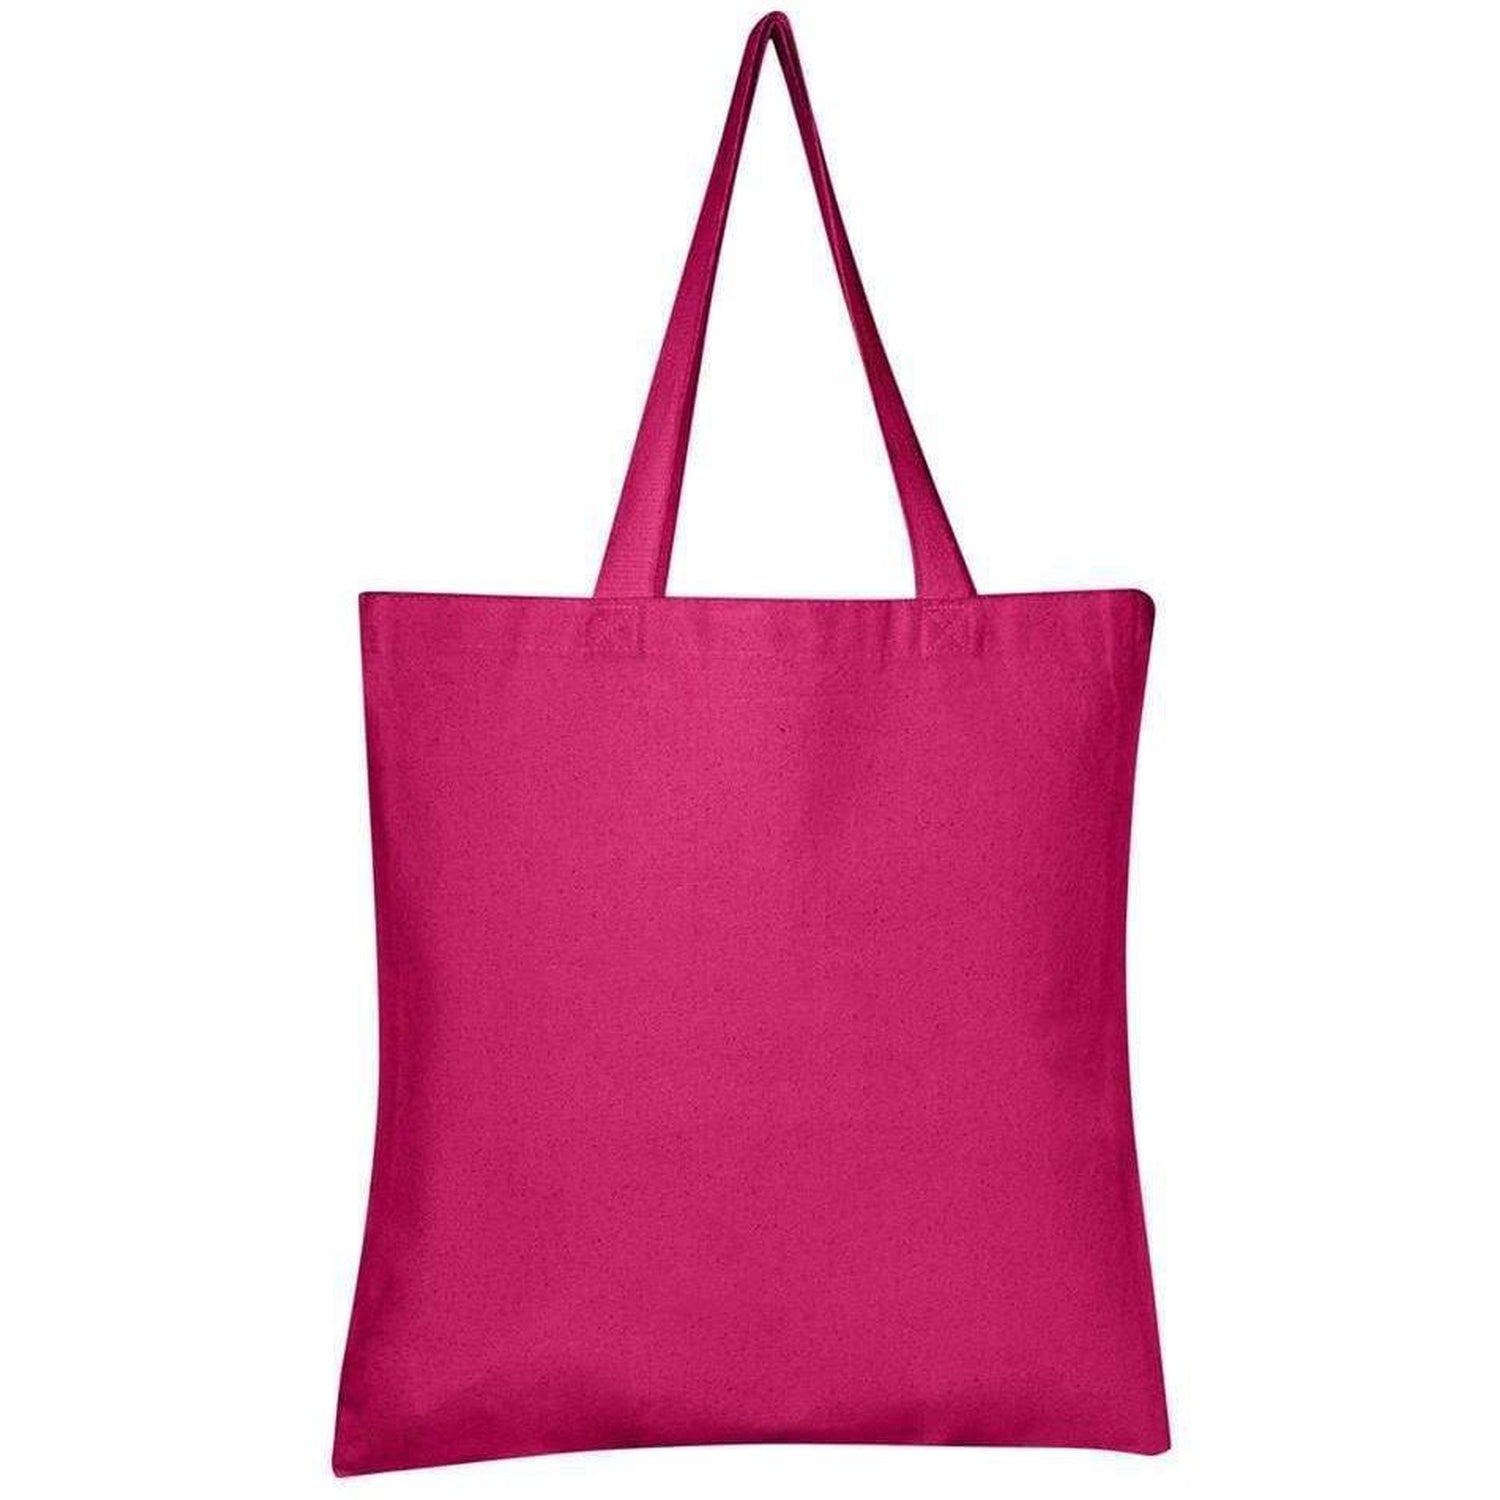 Canvas Tote Bags | Personalized Tote Bags & Tote Bags Wholesale – BagzDepot™